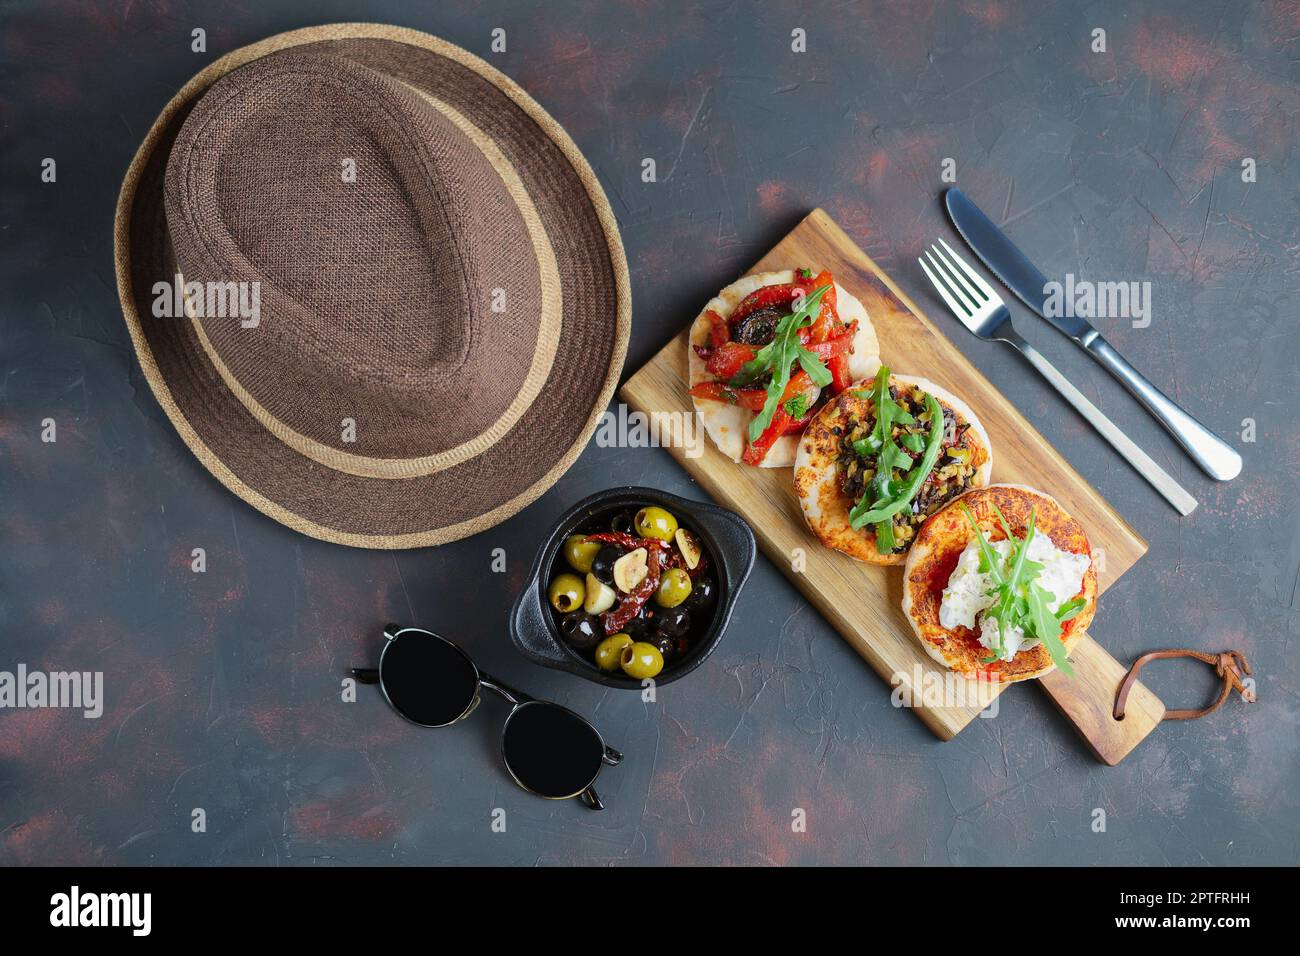 Delicious tapas set. Small sandwiches with goat cheese, chopped olives and nuts, cured tomato and roasted bell pepper. Stock Photo